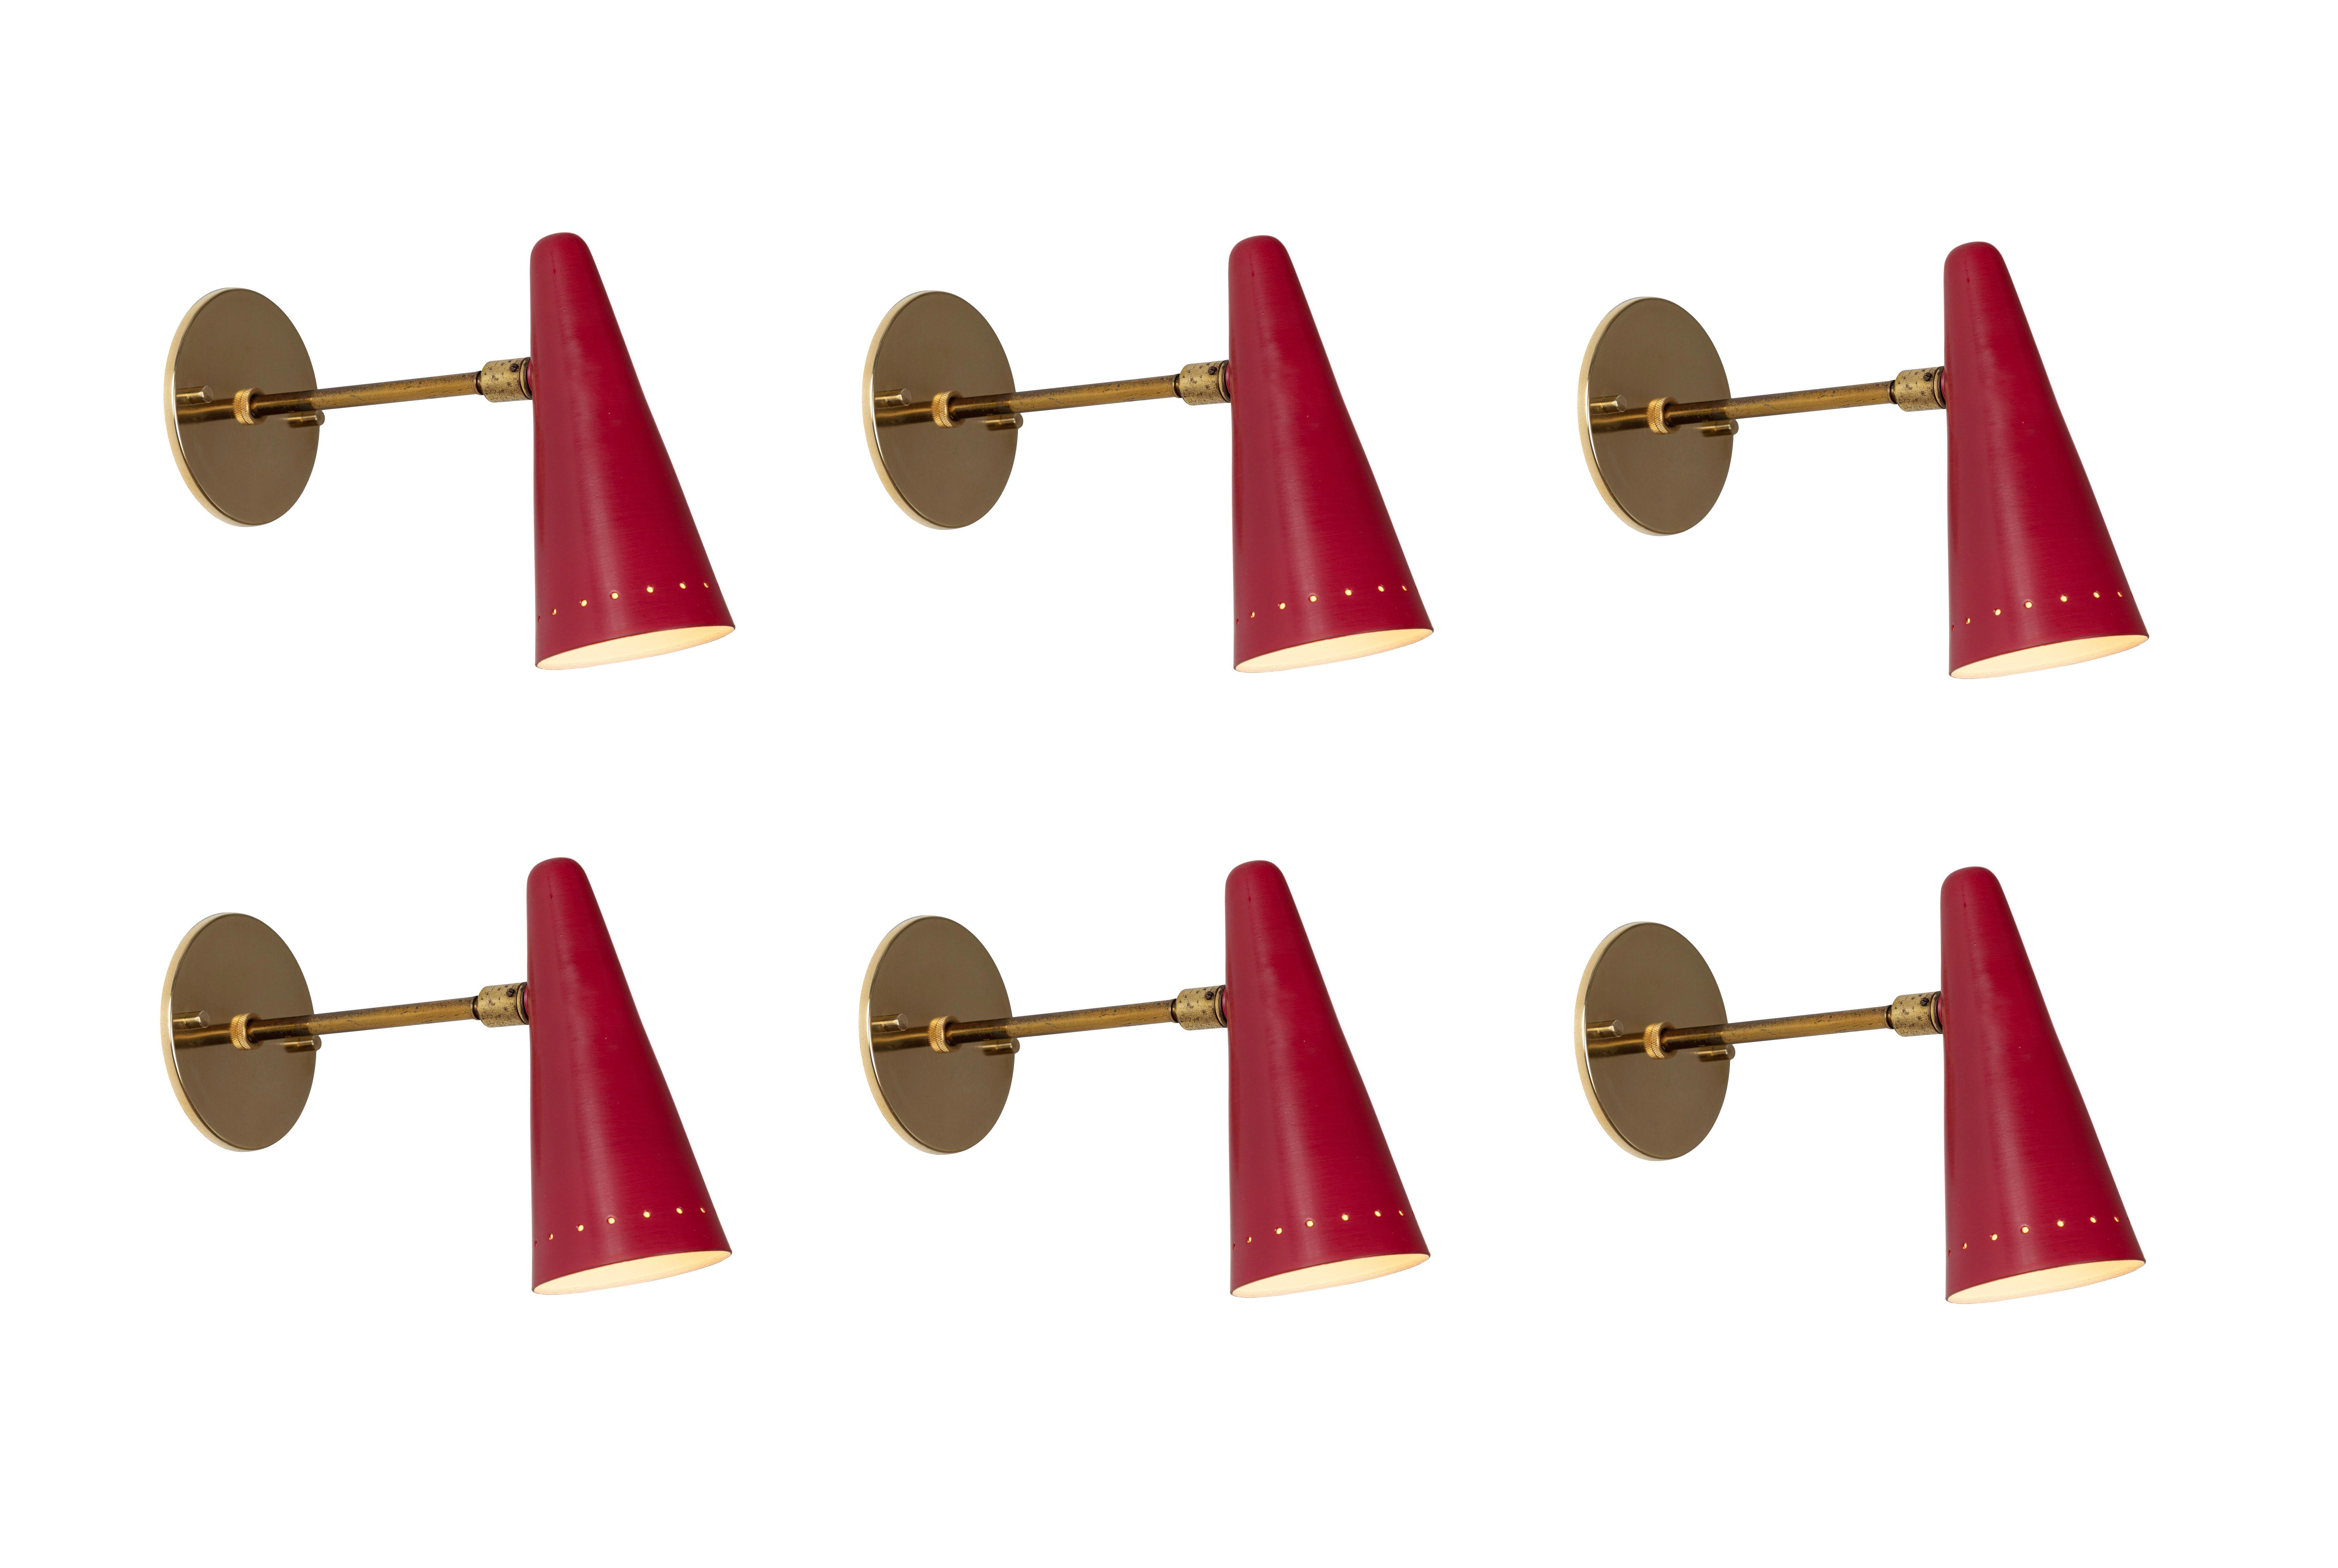 Pair of 1960s Stilux articulating red cone sconces. In the manner of Gino Sarfatti. Executed in brass and red painted aluminum. Sconces pivot up/down and left/right. Wired for US electrical. Custom patinated brass backplates.

Price is per pair.